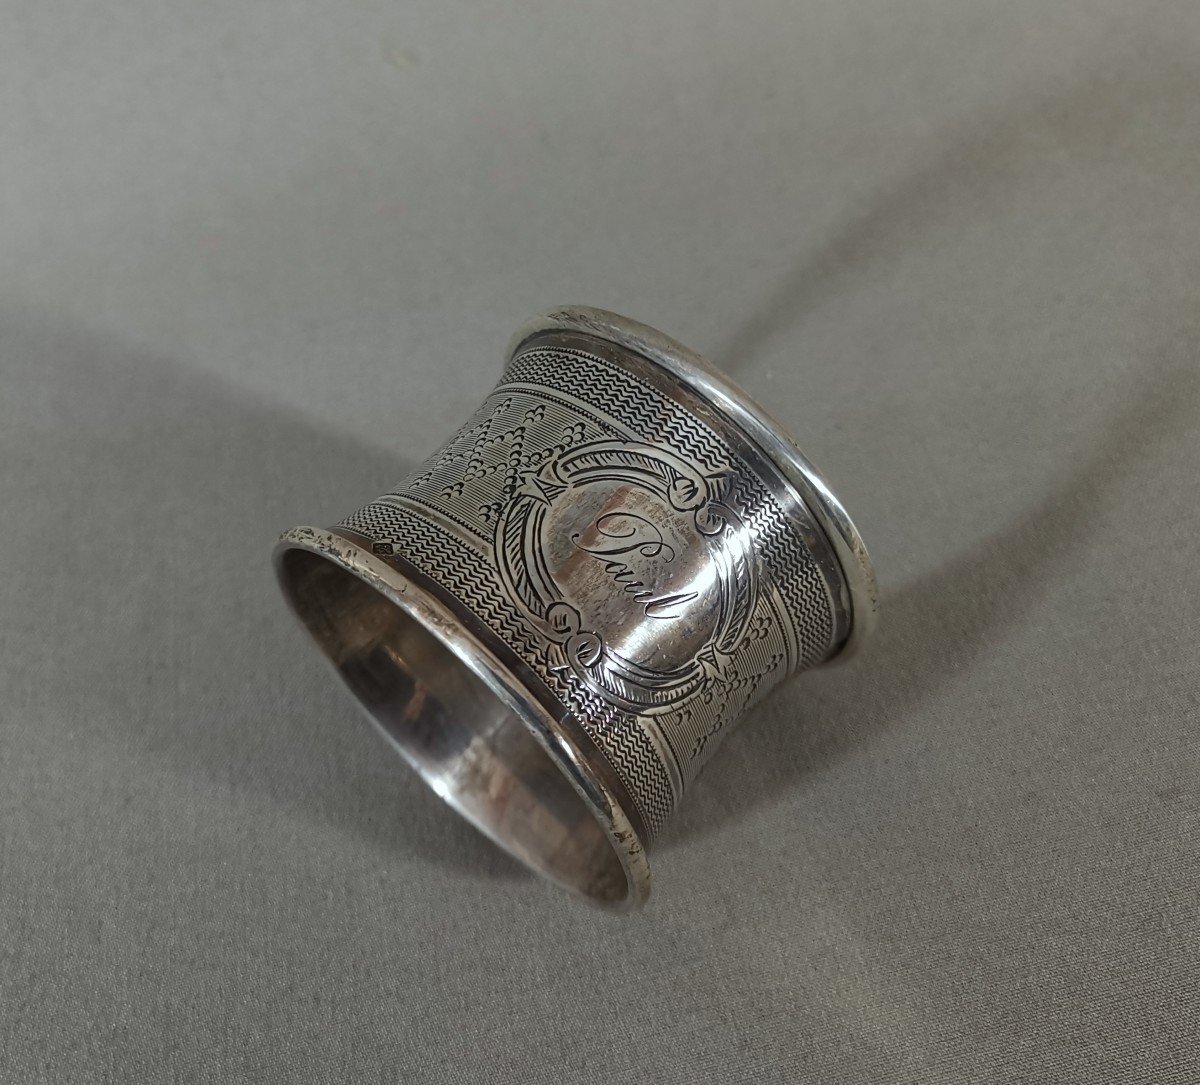 Flowing Or Napkin Ring From The 19th Century In Silver Minerva, Goldsmith César Tonnelier (1845-1882)-photo-4